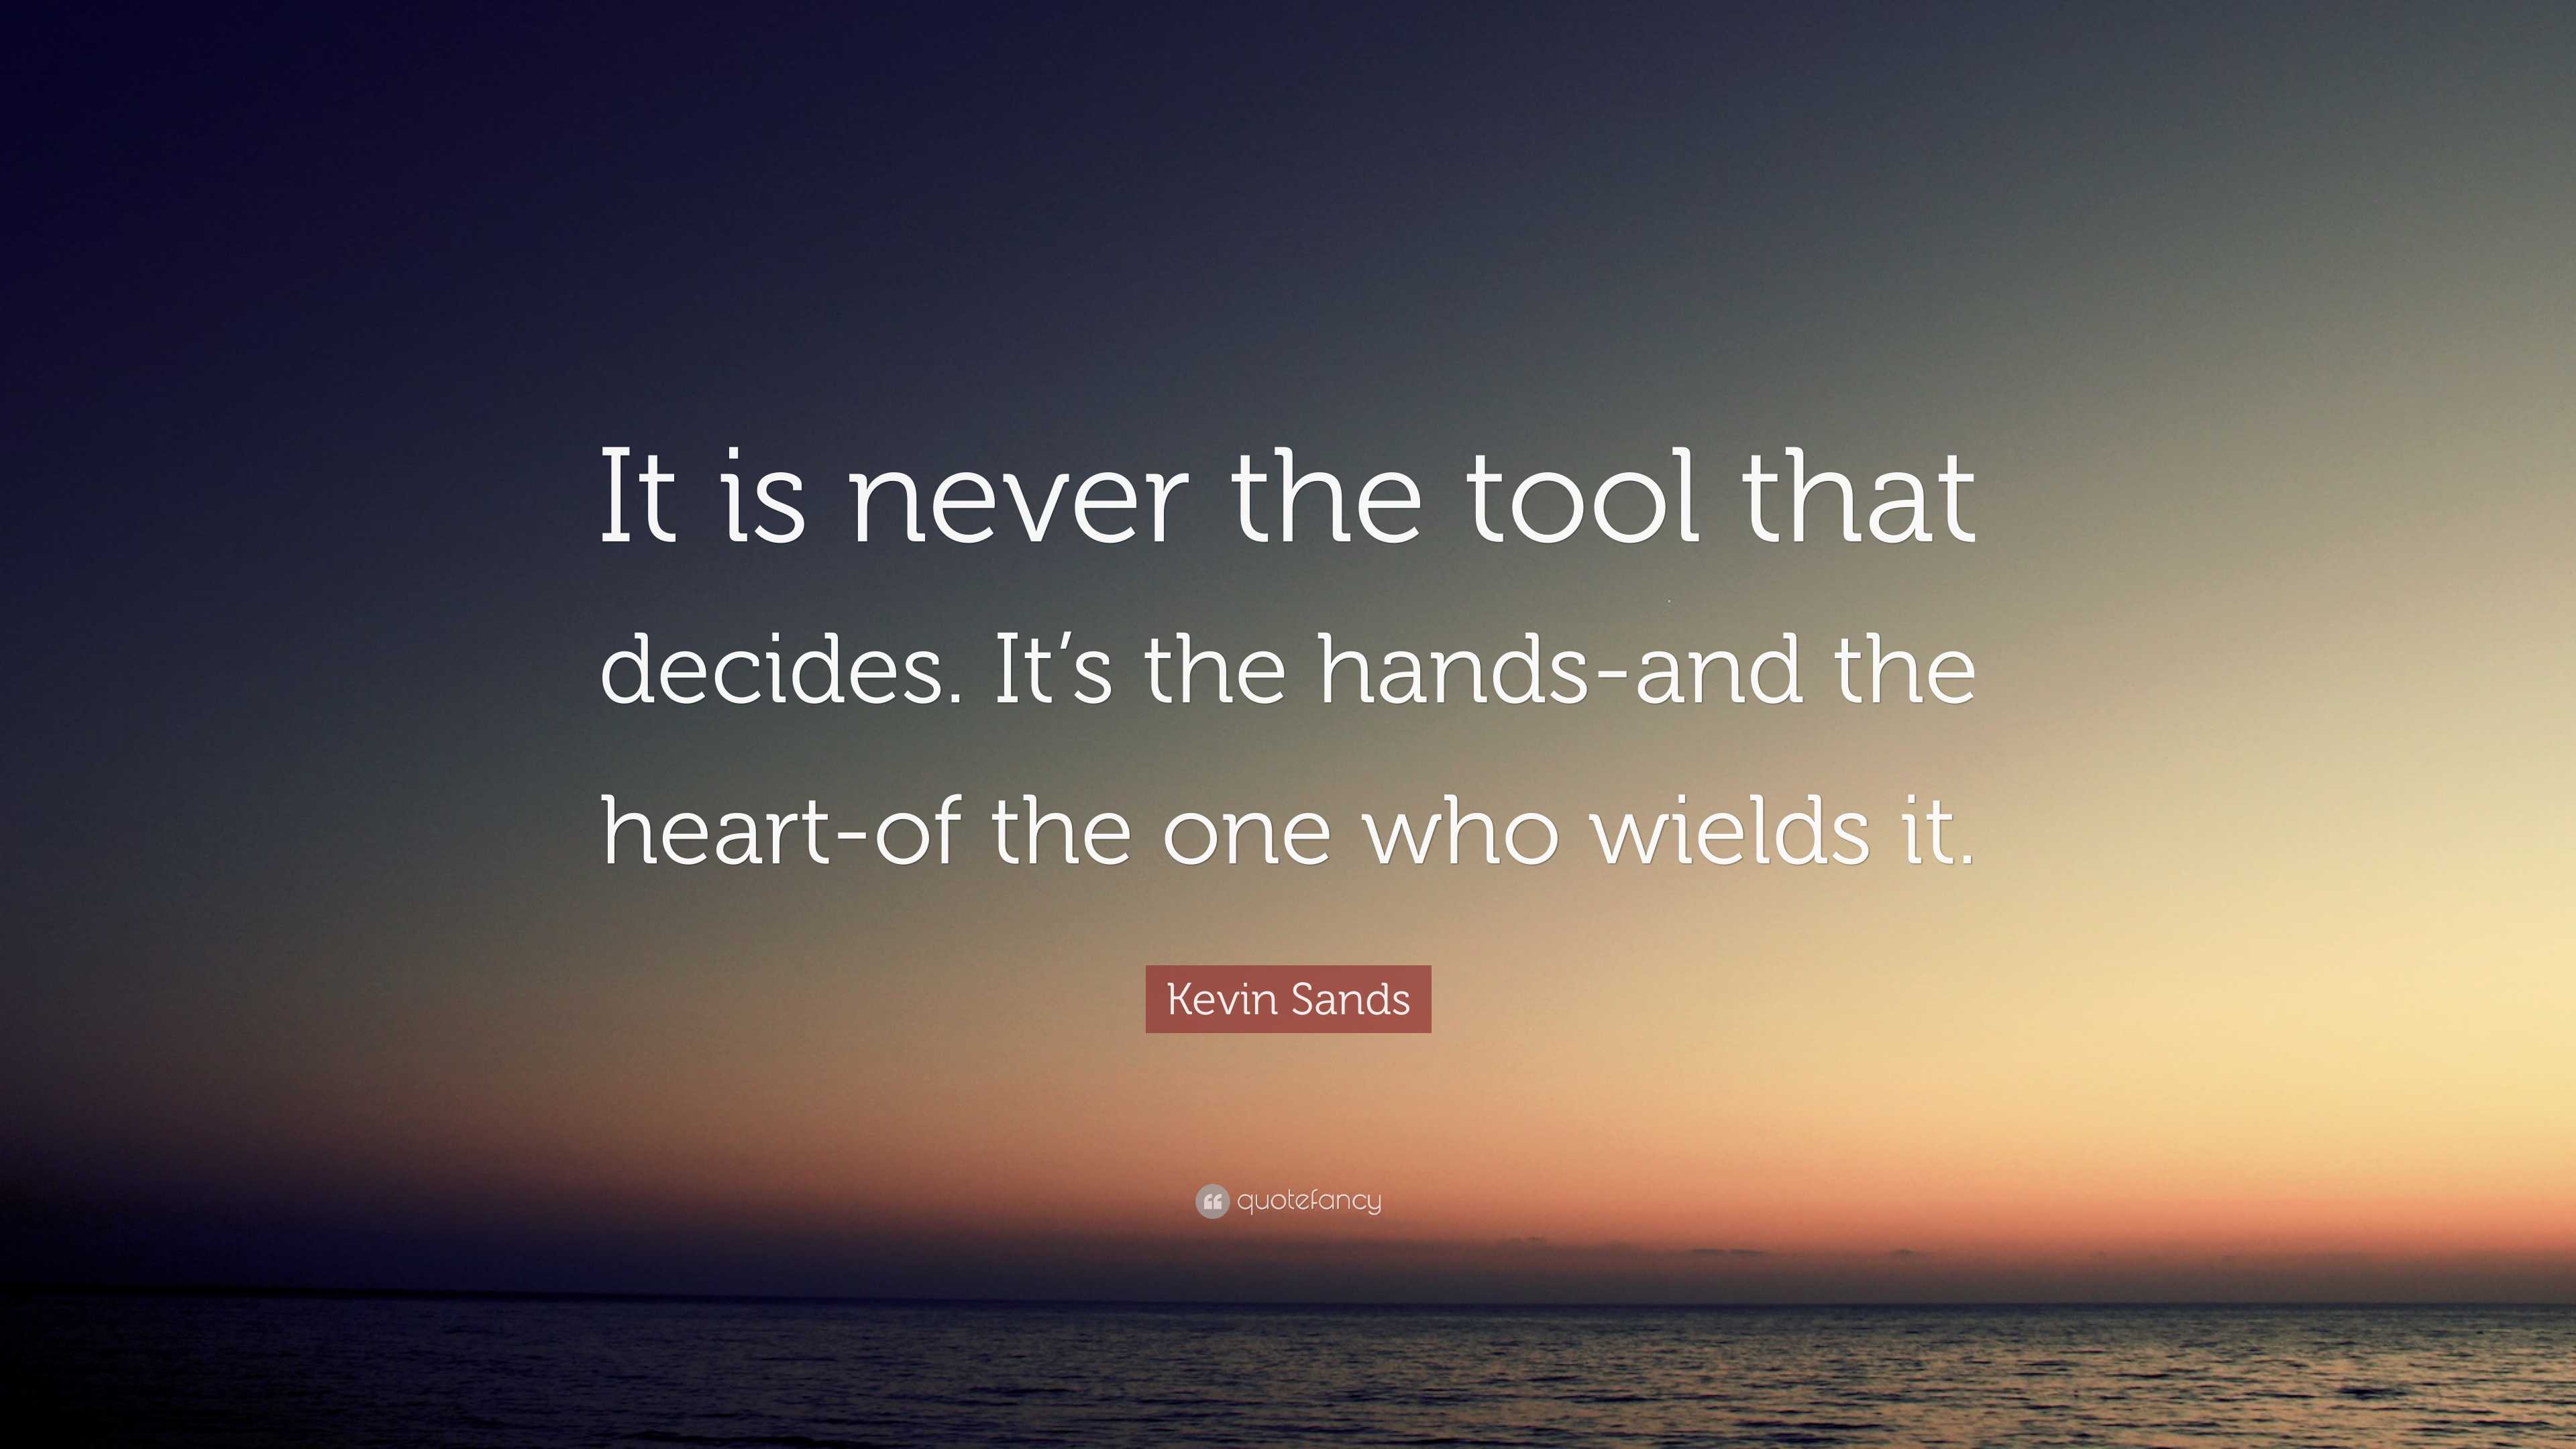 Kevin Sands Quote: “It is never the tool that decides. It’s the hands ...